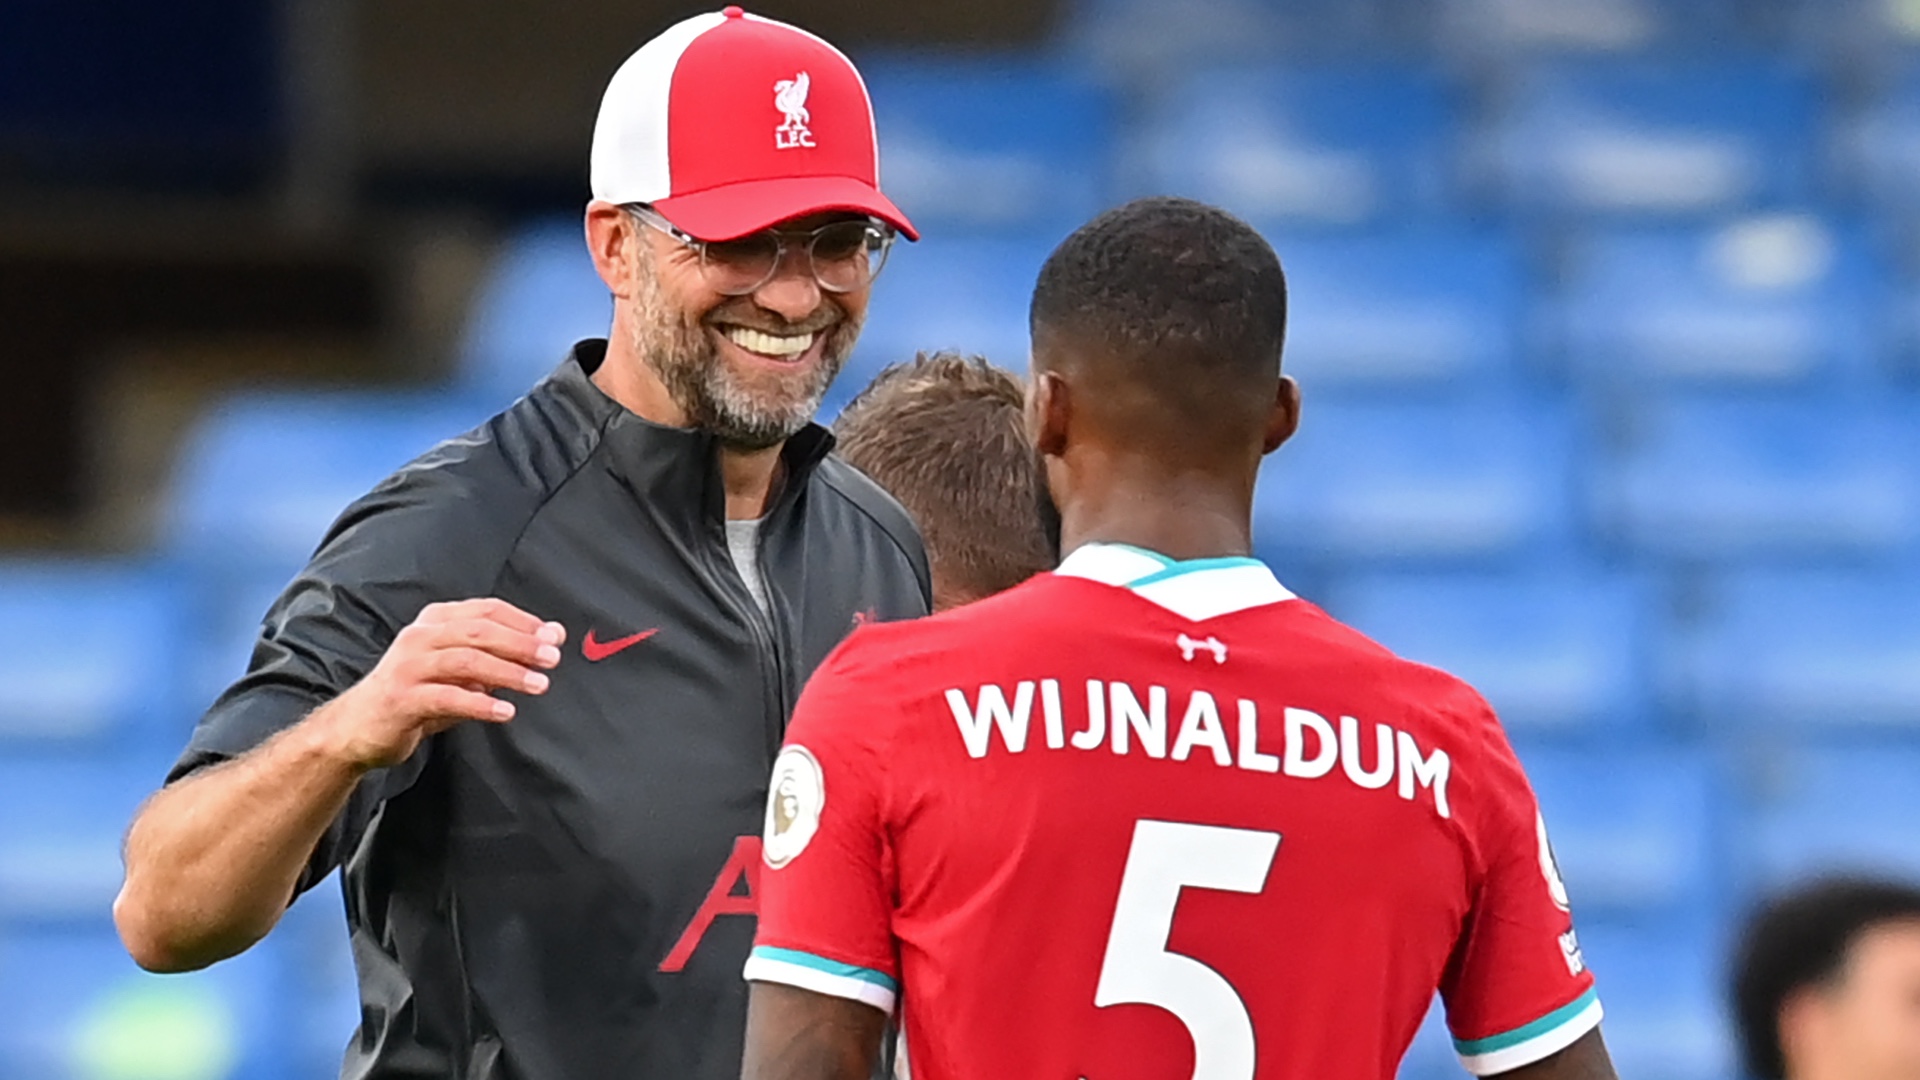 Klopp wants Wijnaldum to stay at Liverpool - but says contract issue will not affect Dutchman's form